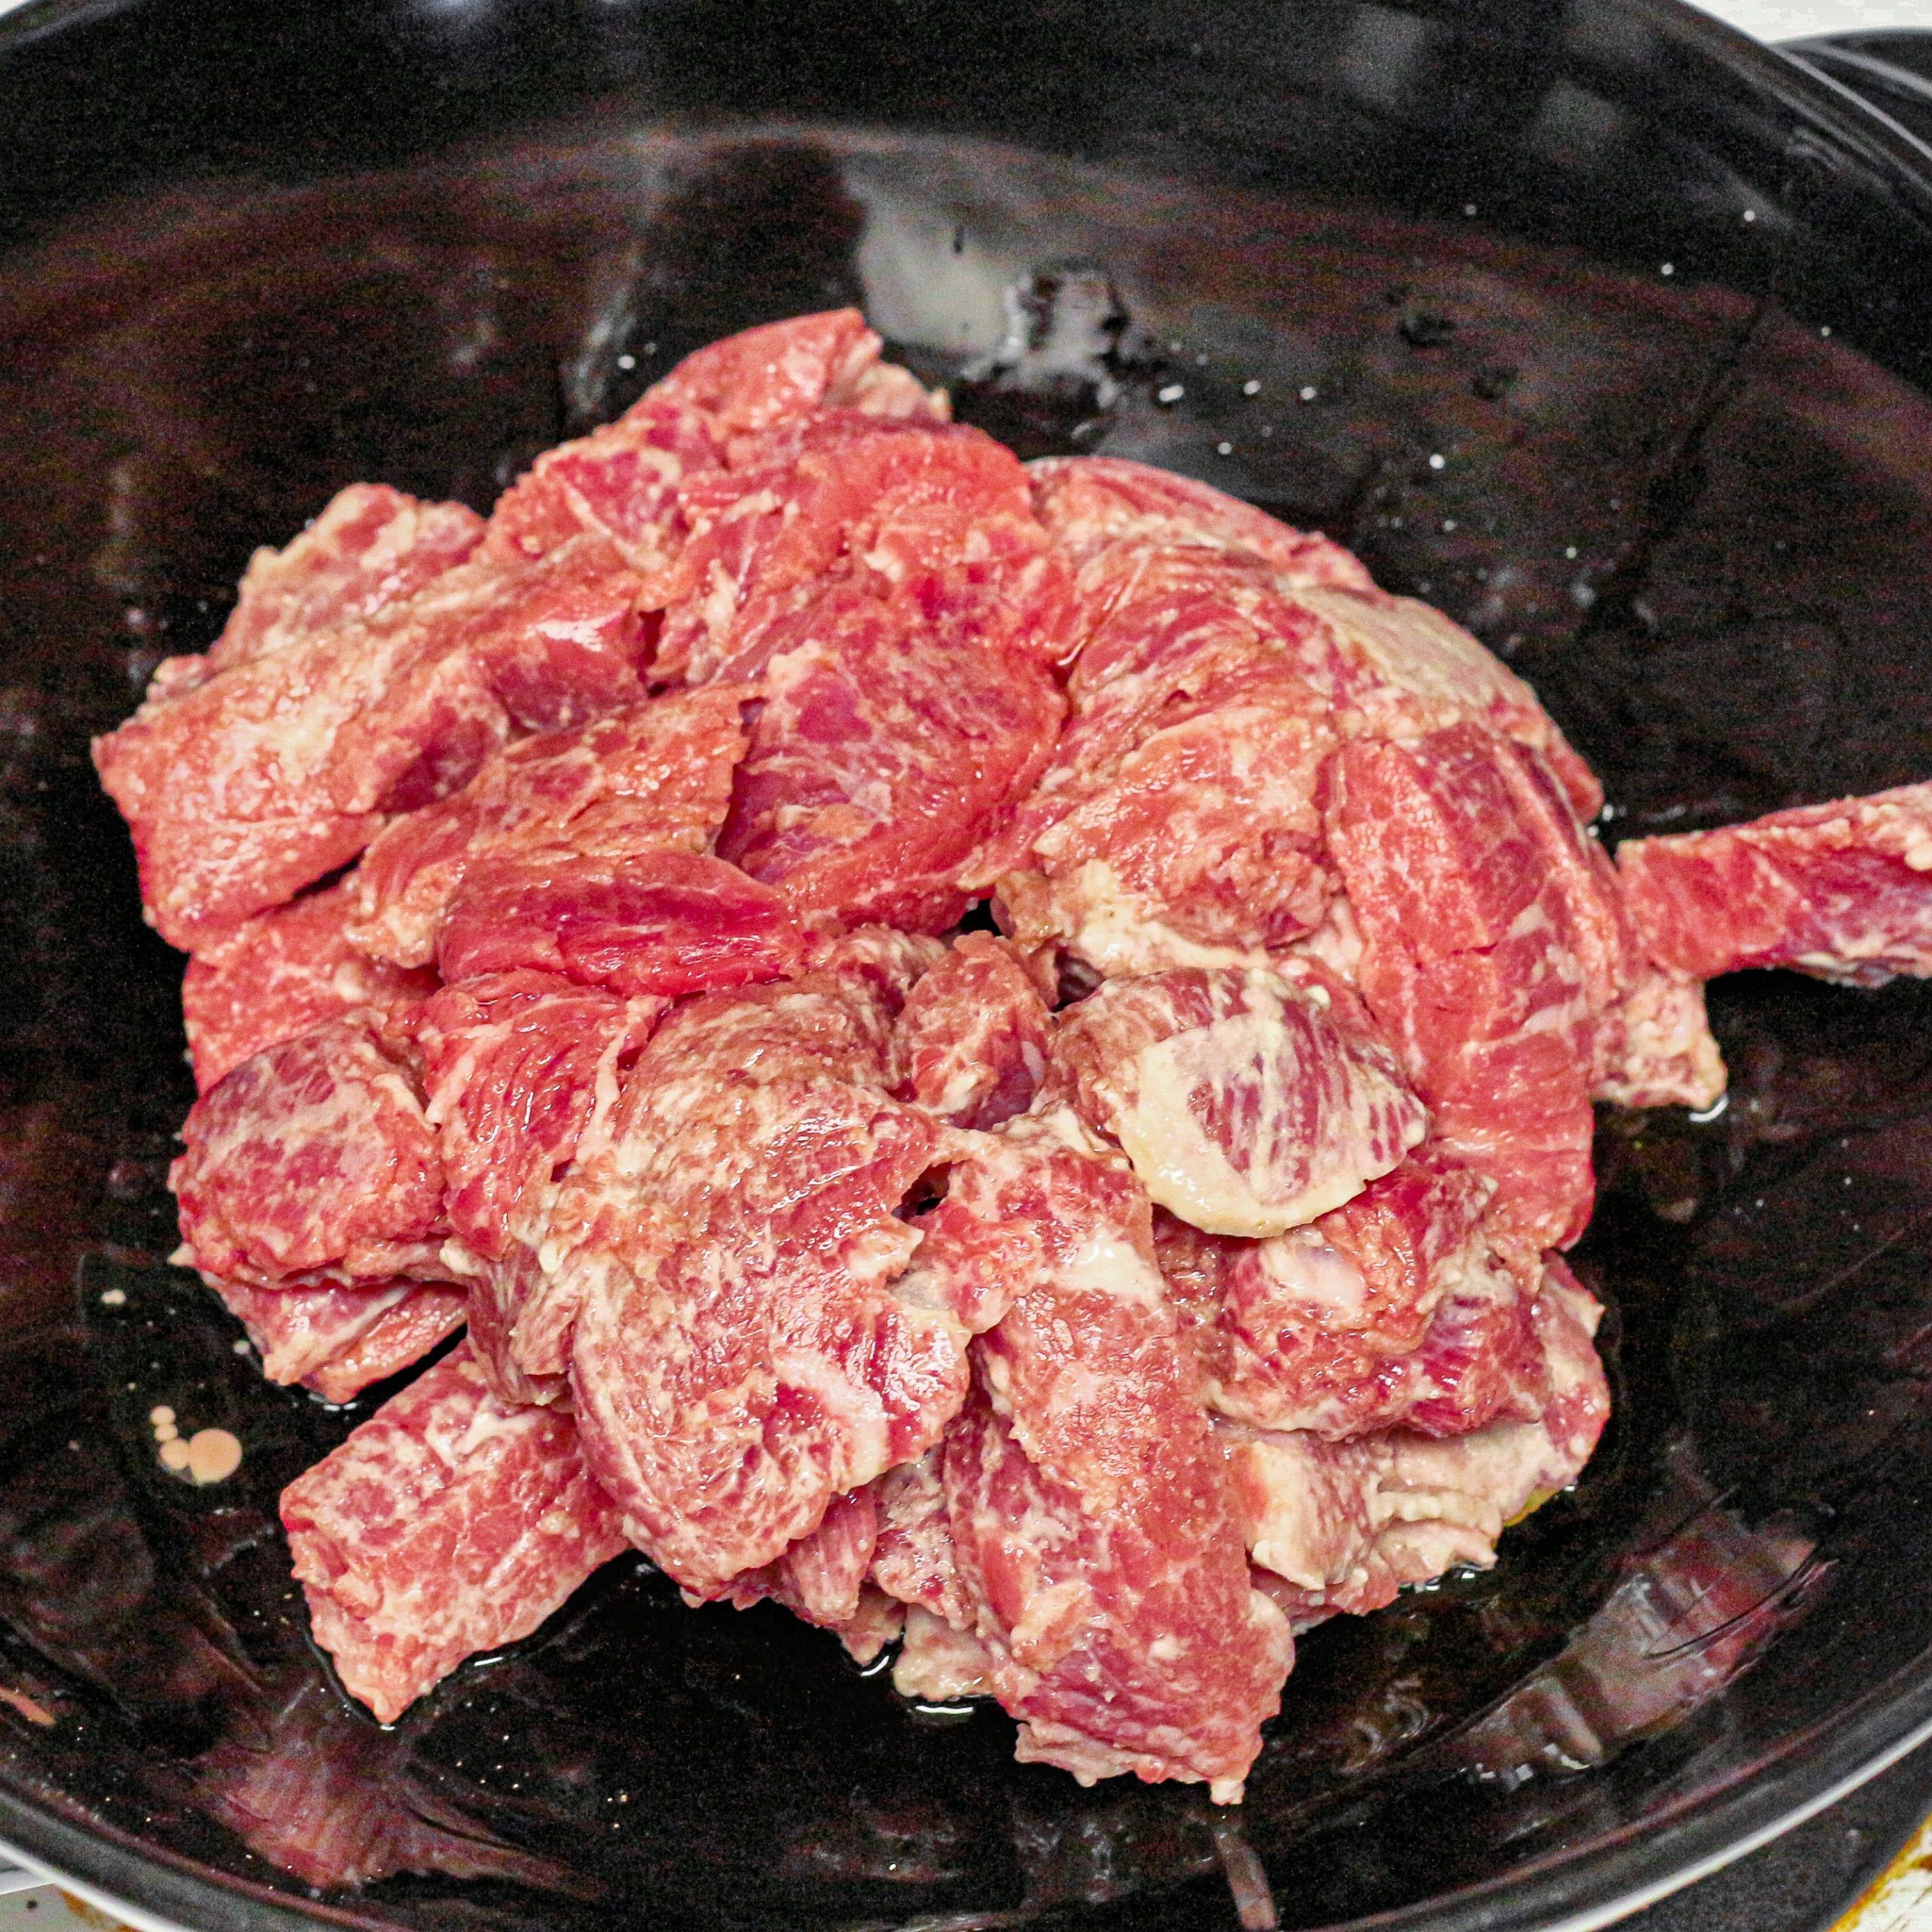 In a large wok over medium-high heat, stir-fry beef in 1 tablespoon oil until beef is browned.